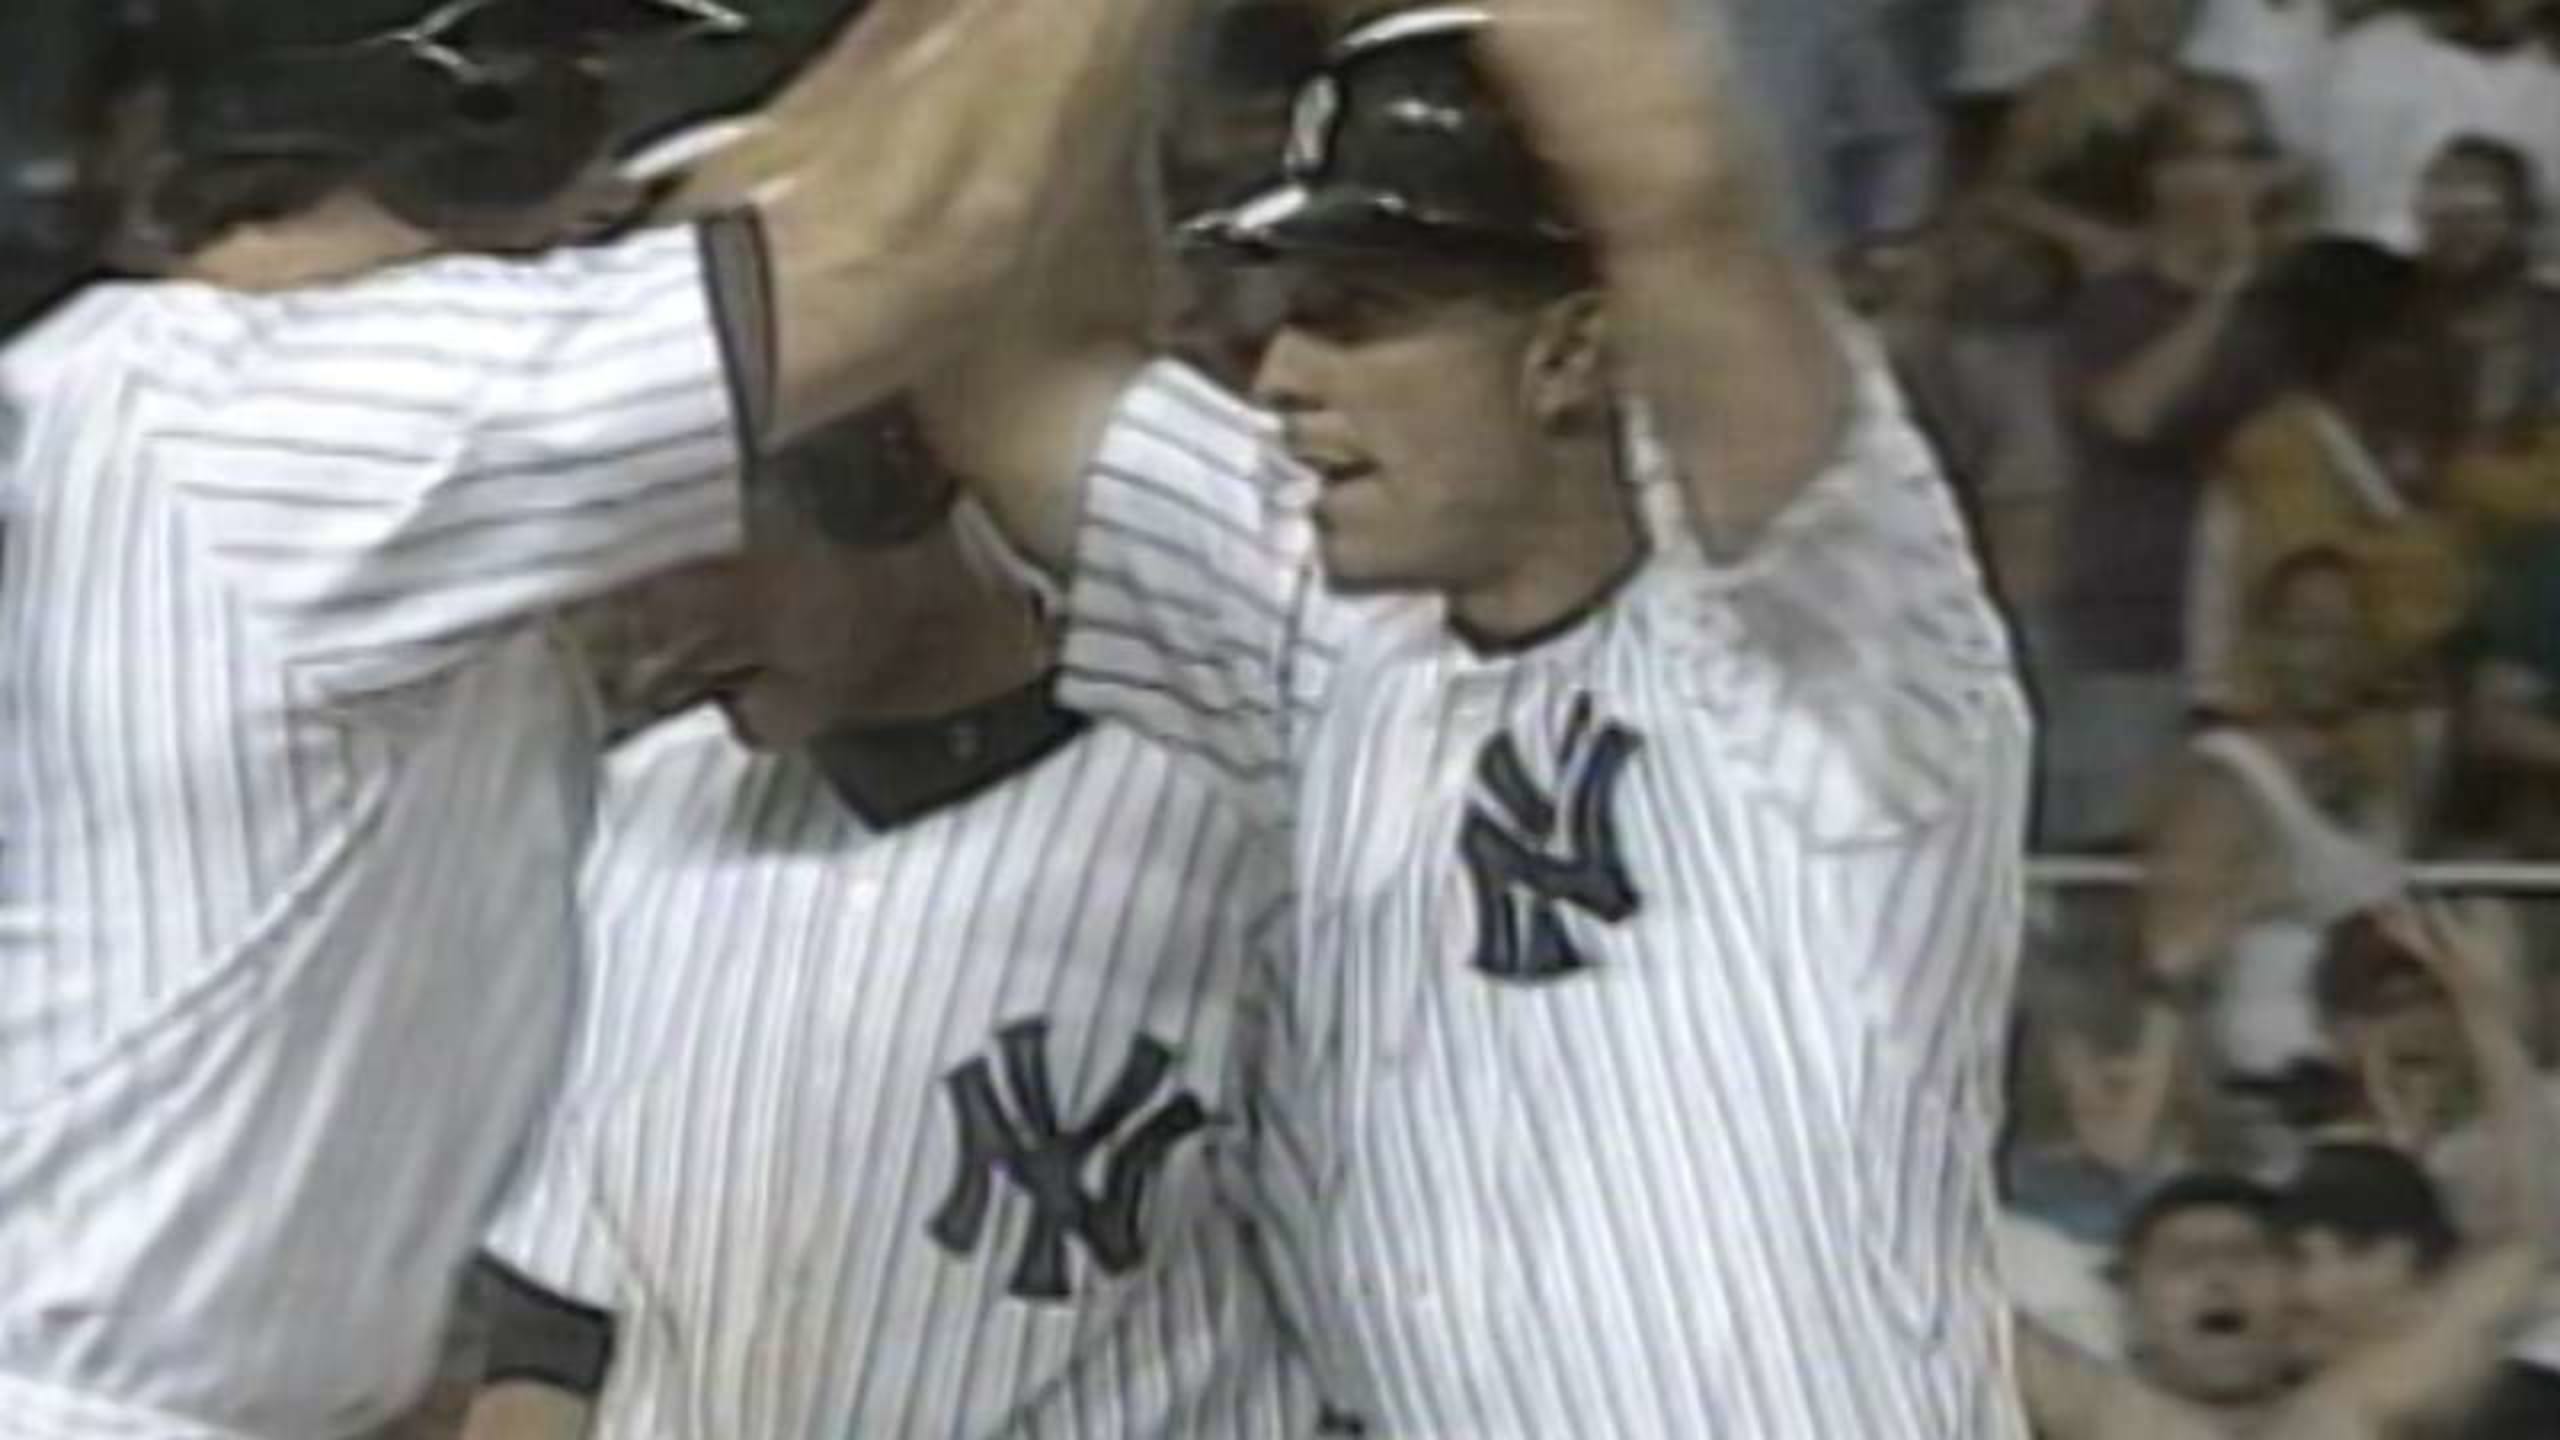 1998 Yankees Diary: Strawberry moonshot helps avoid sweep in Baltimore -  Pinstripe Alley